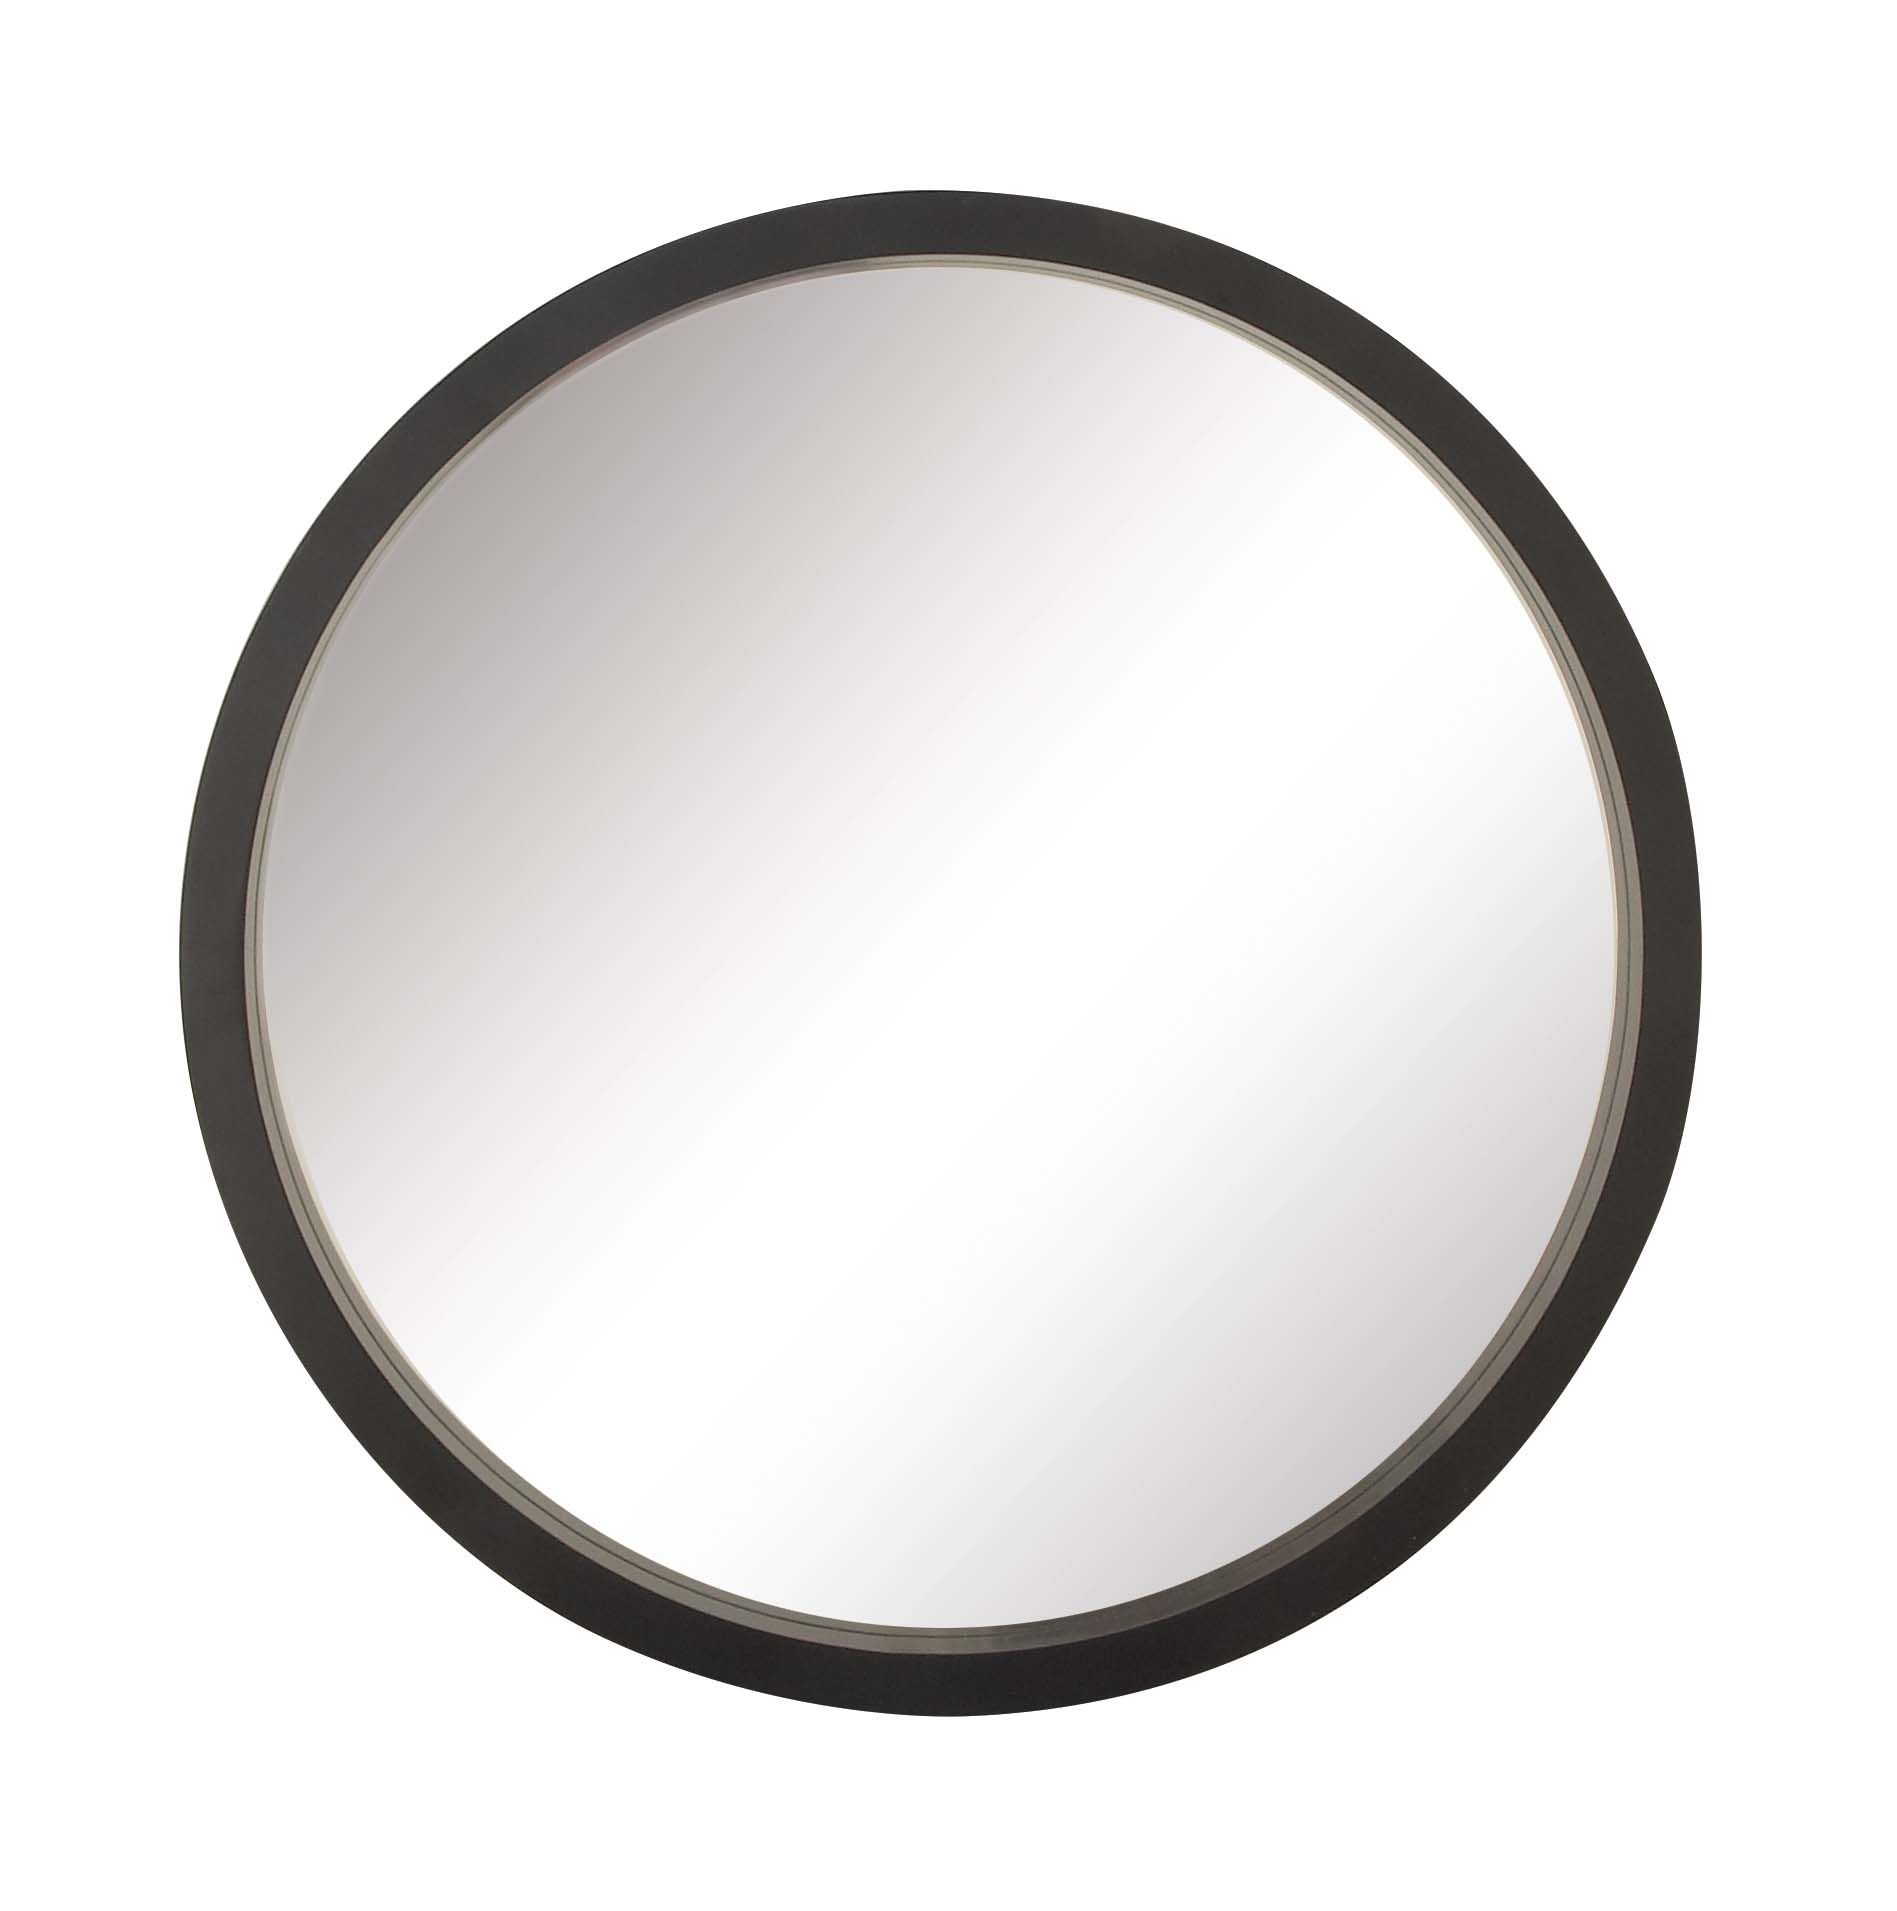 Decmode 32 Inch Contemporary Wooden Framed Round Wall Mirror, Black Throughout Round 4 Section Wall Mirrors (View 3 of 15)